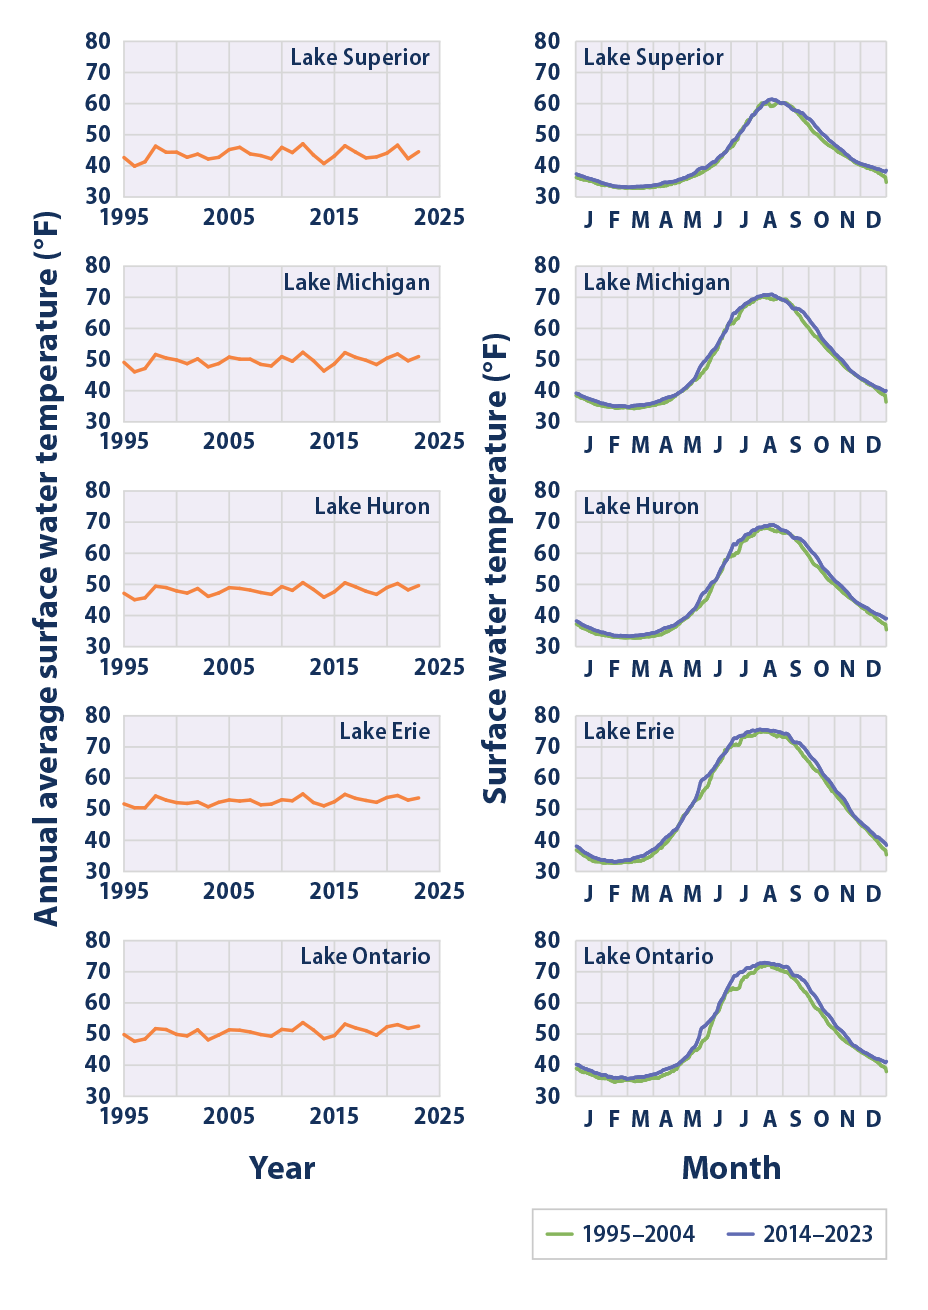 Line graphs showing water temperatures in each of the Great Lakes from 1995 to 2023.